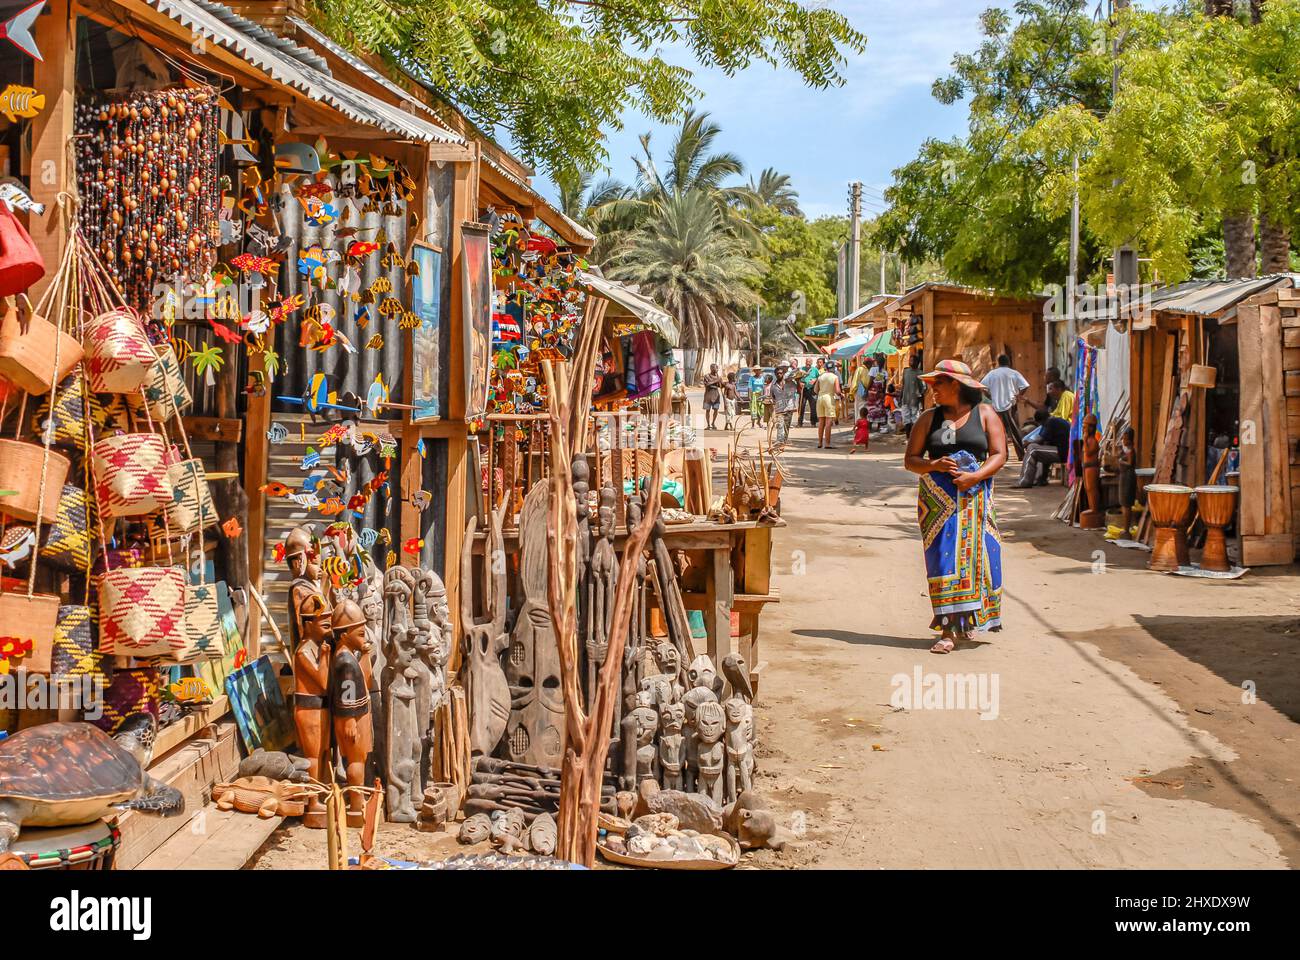 Local people at a tourist market in Toliara on Madagascar Island, Africa Stock Photo